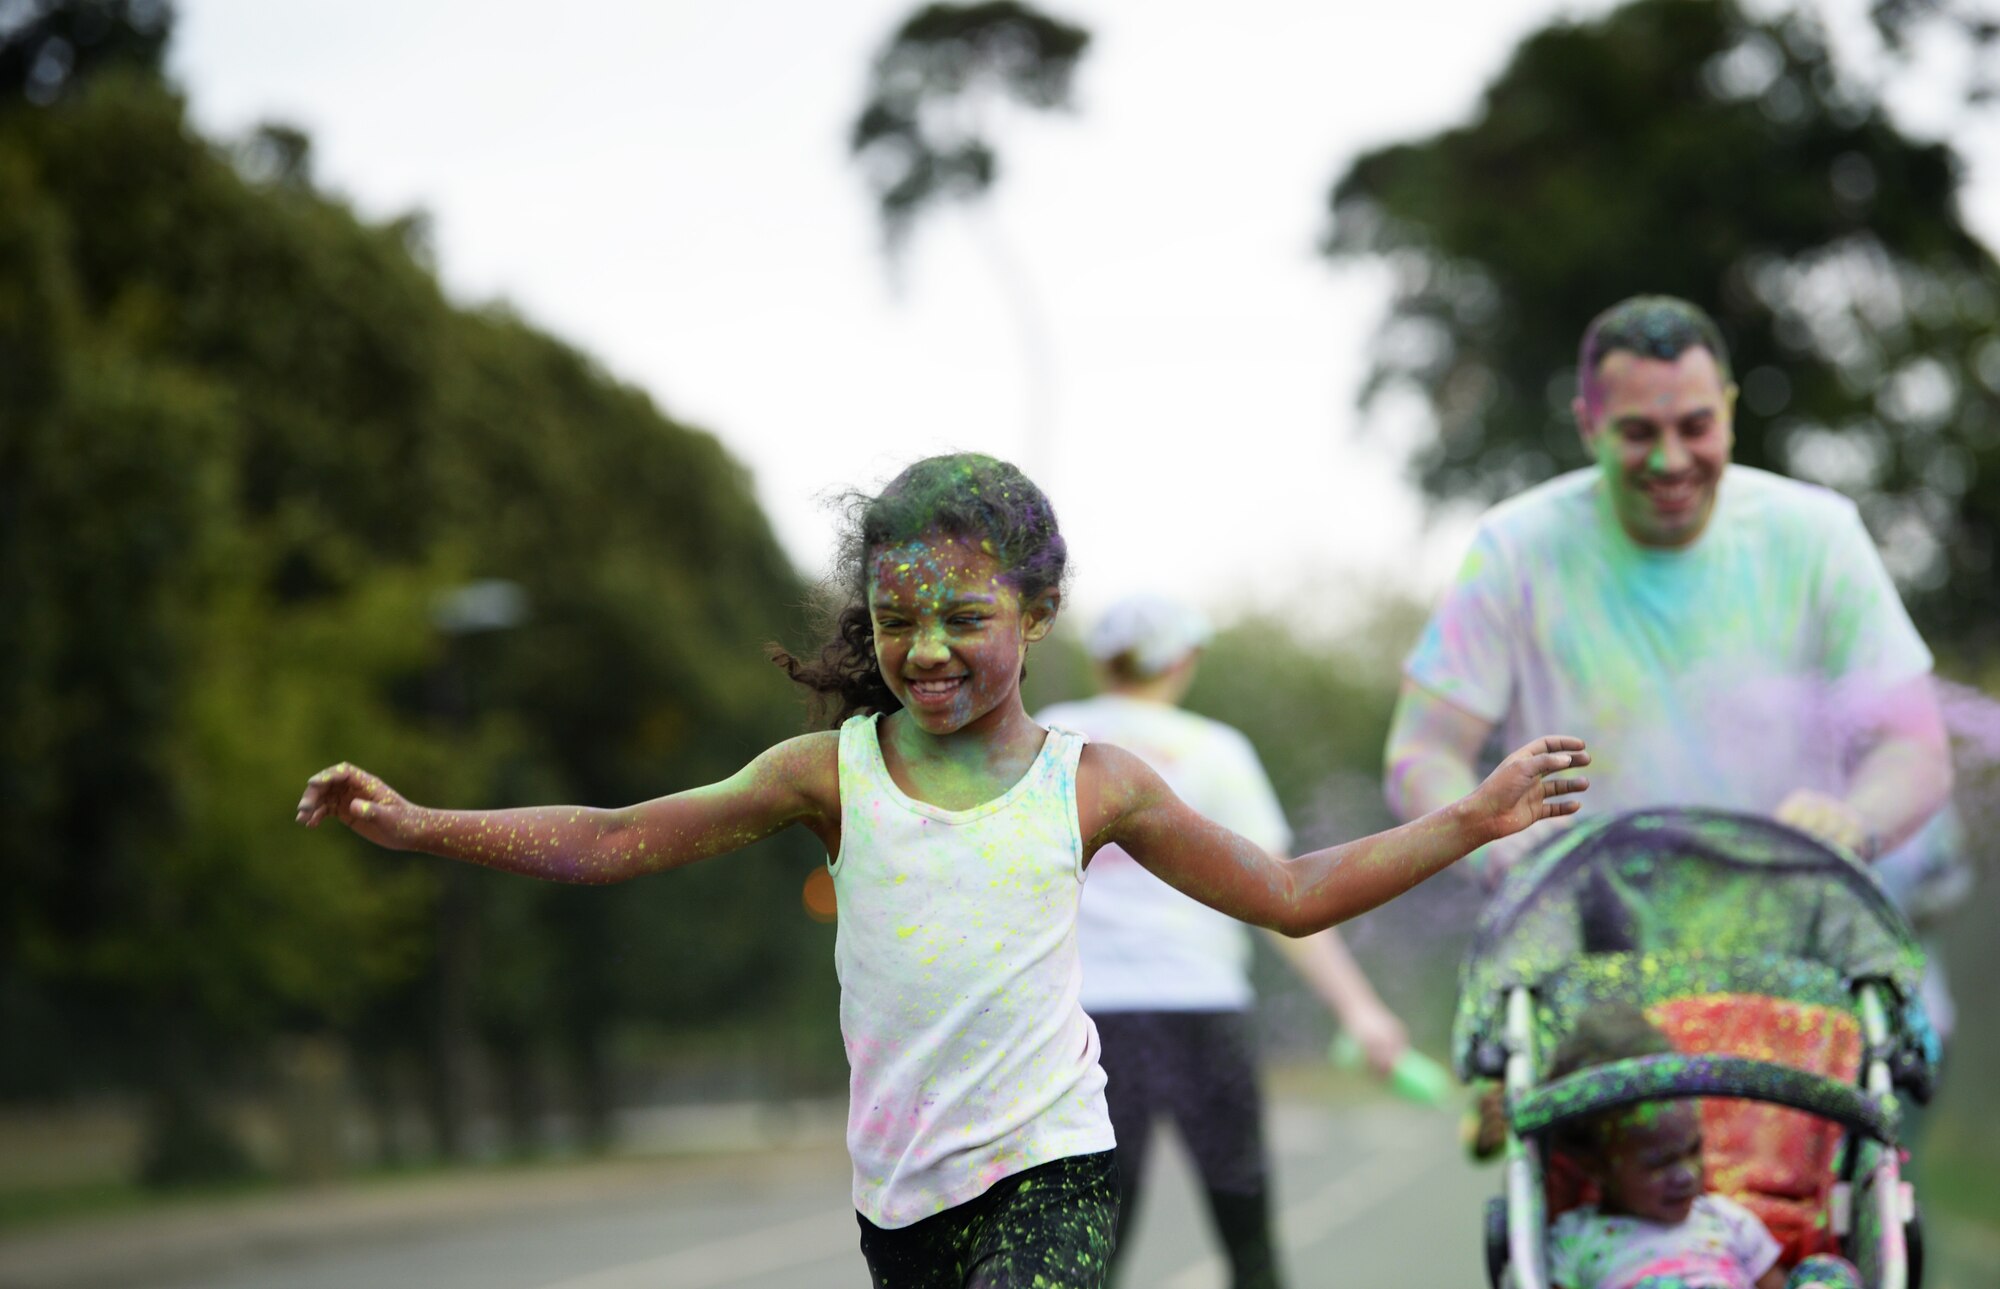 A child runs ahead of her family to the finish line of a color dash at Royal Air Force Lakenheath, England, Aug. 18, 2018. The color dash provided RAF Lakenheath and RAF Mildenhall families an opportunity to unite in fun activities before the start of the school year. (U.S. Air Force photo/Airman 1st Class Shanice Williams-Jones)